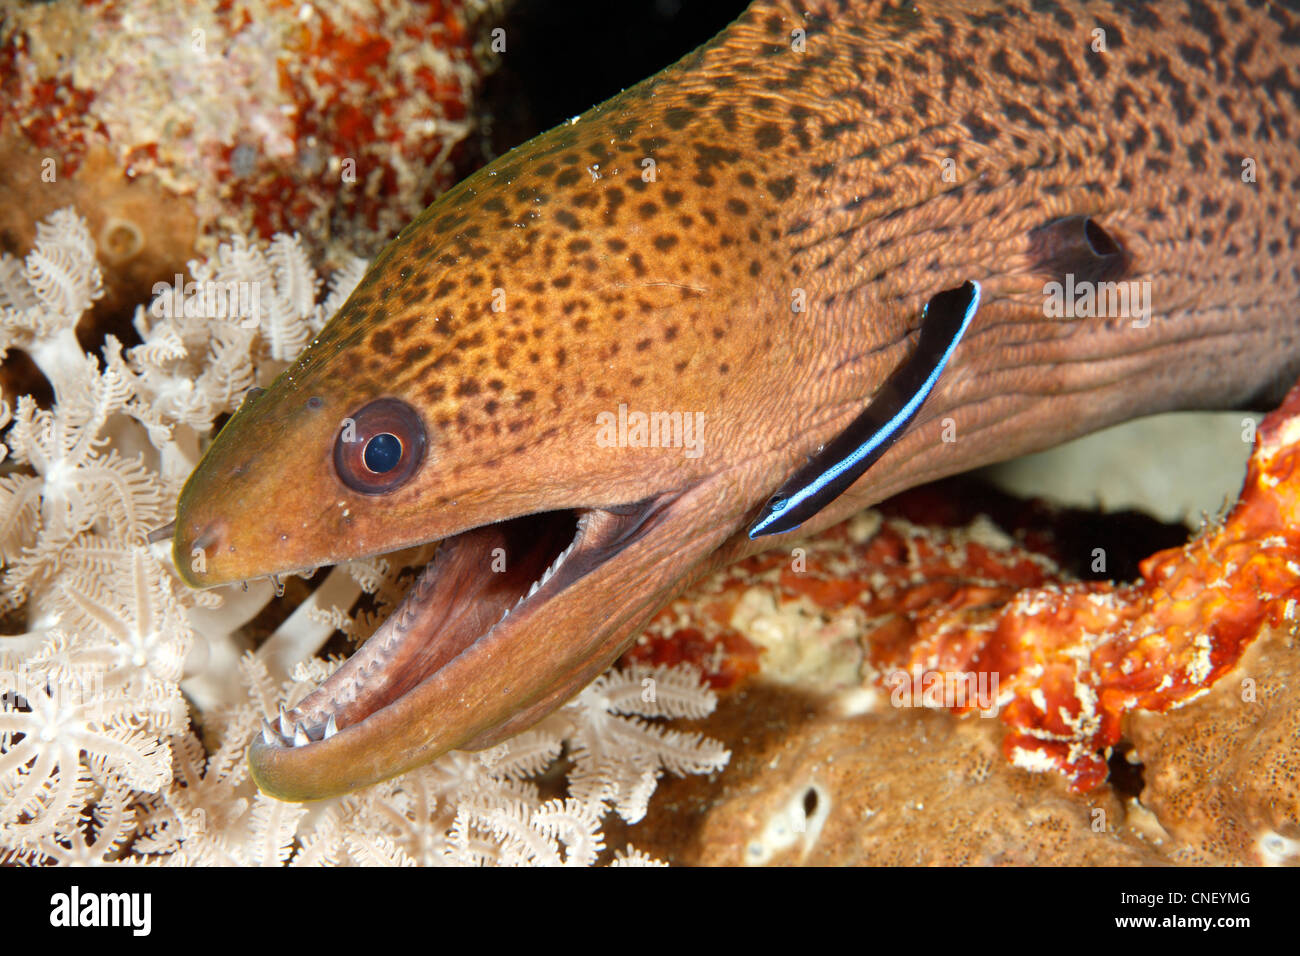 Giant Moray Eel, Gymnothorax javanicus, with a juvenile Blue Streak Cleaner Fish Labroides dimidiatus. Stock Photo